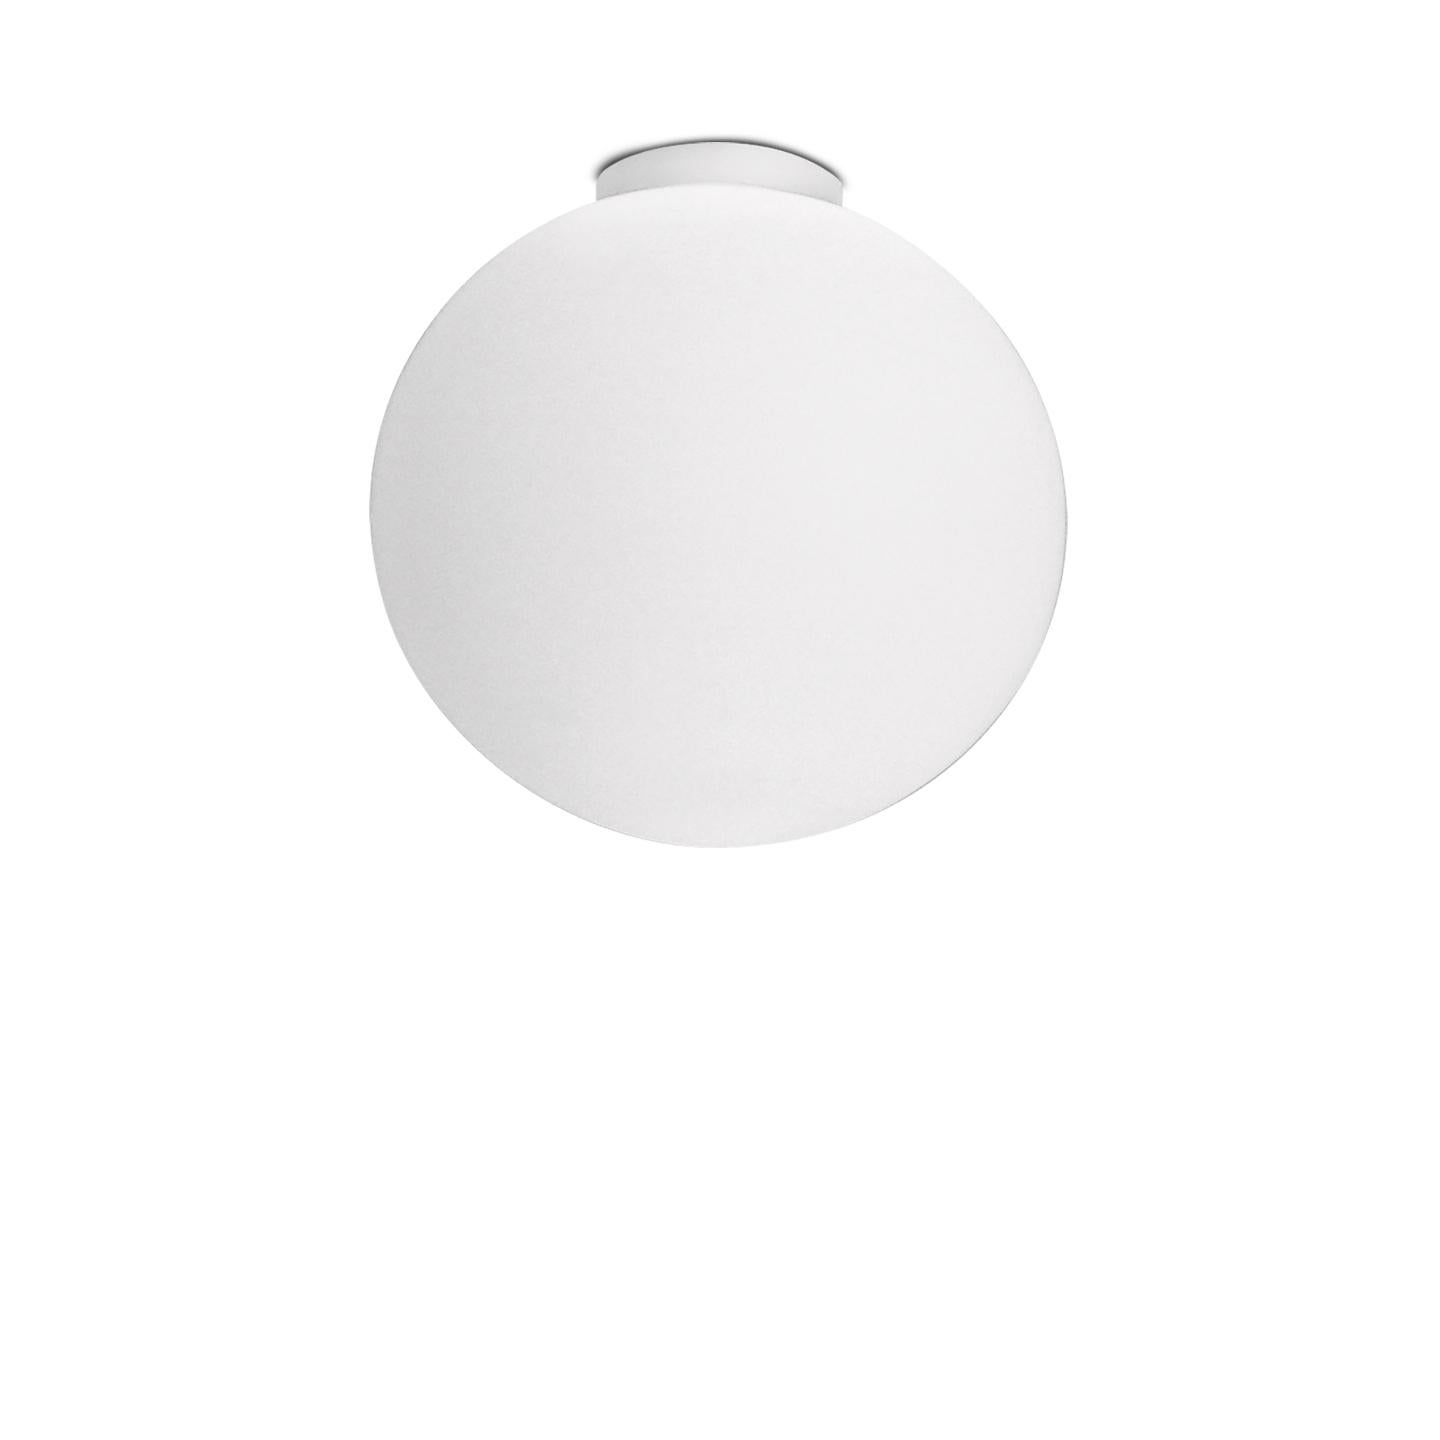 A minimal design that seems to float delicately in your space, Sphera ceiling lamp is made of hand blown Italian glass. Matteo Thun designed Sphera in 2000 as a simple, slightly flattened oval shape that emphasizes the remarkable quality that goes